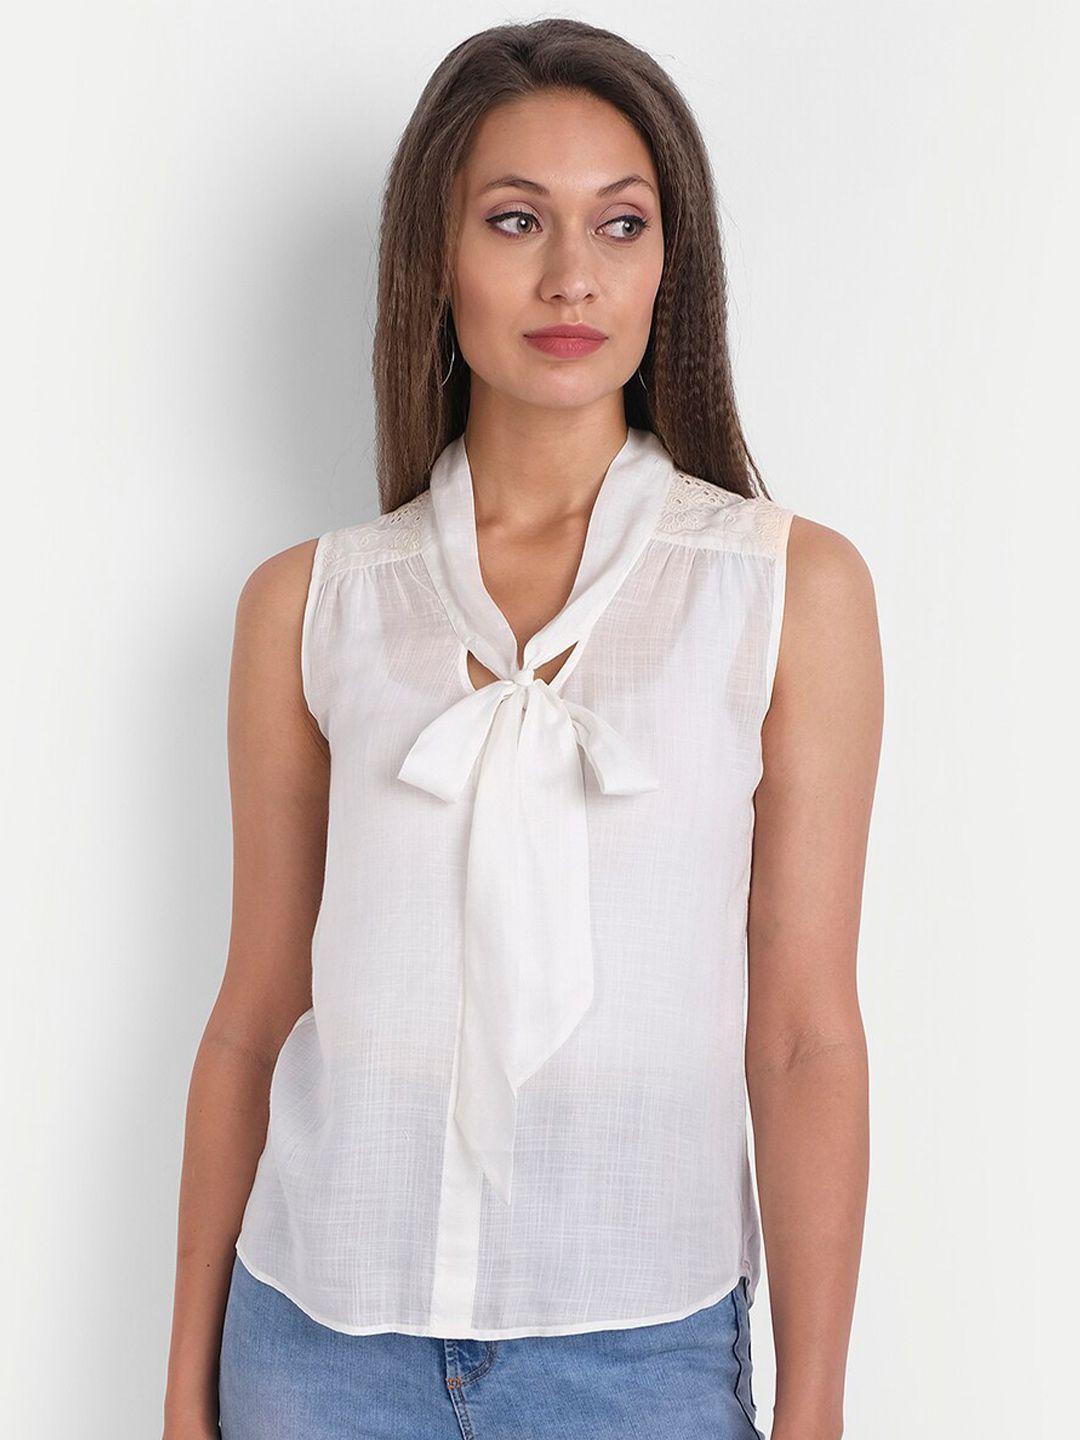 ly2 cream-coloured solid tie-up neck shirt style top